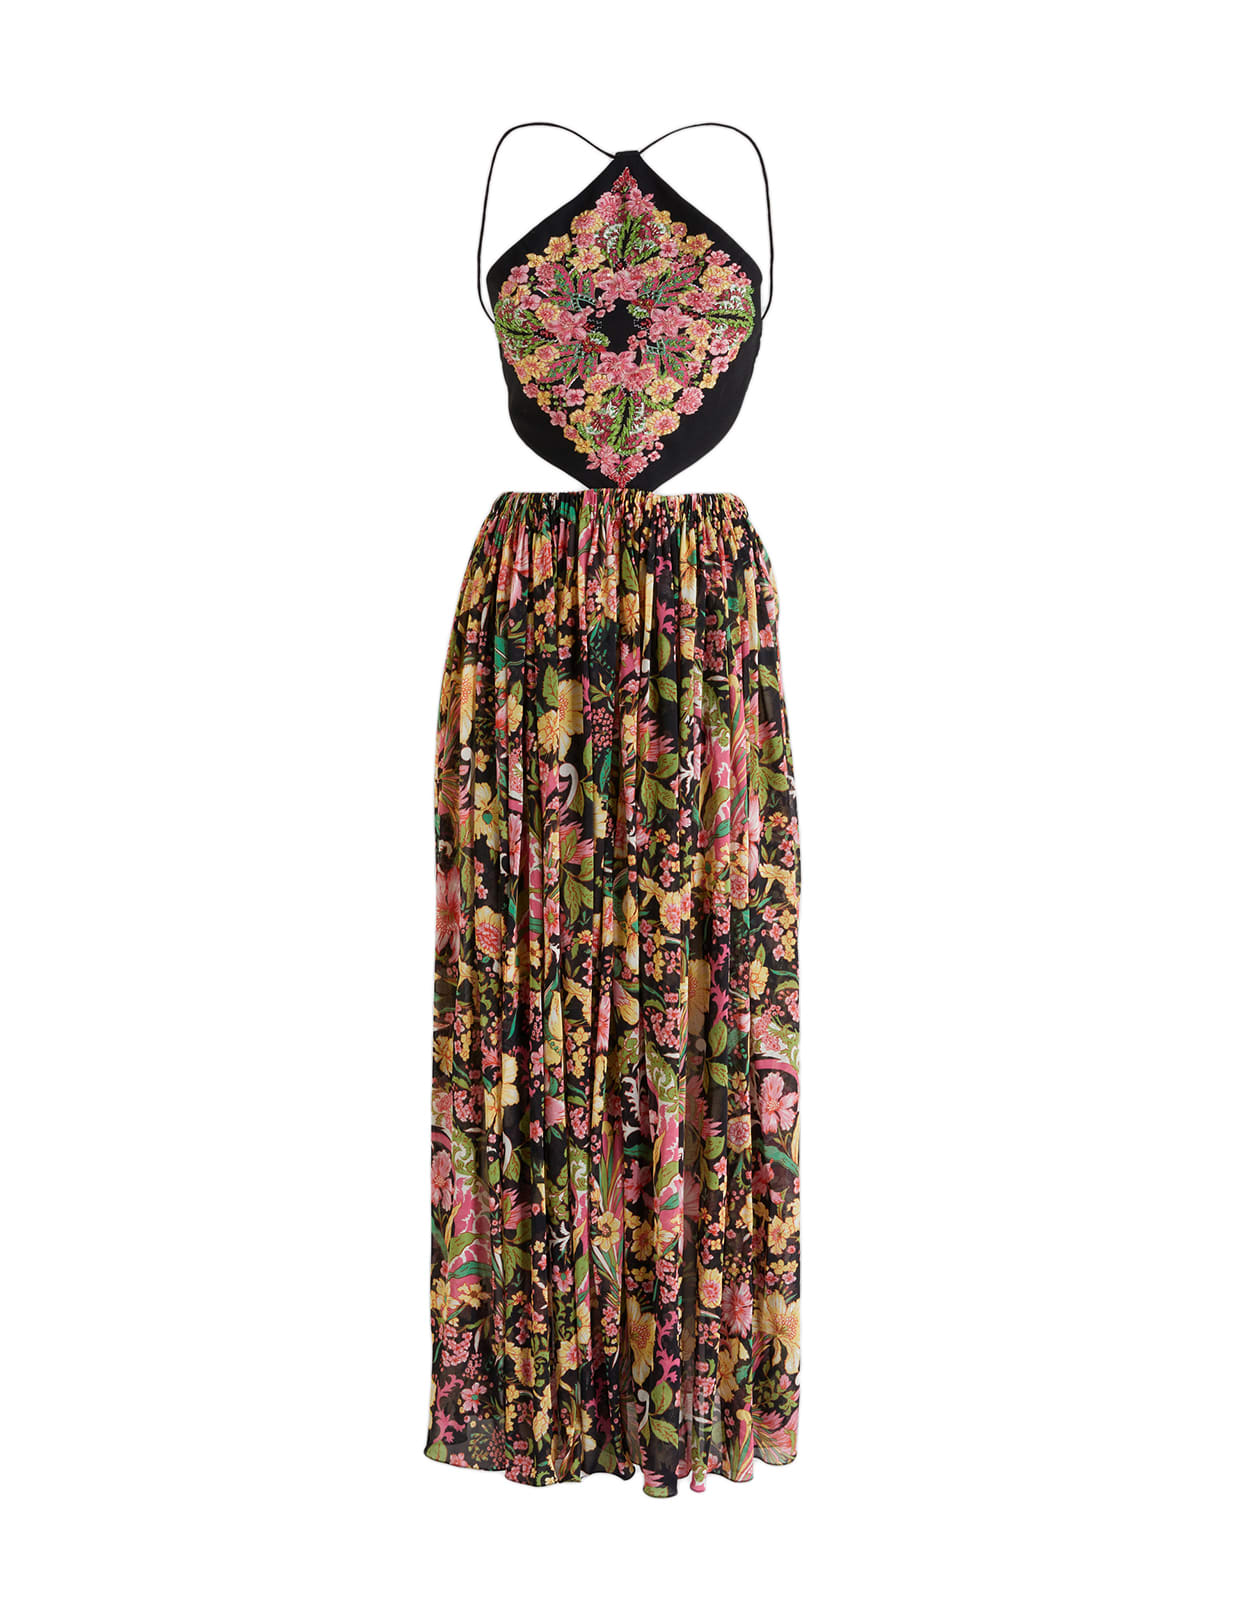 Etro Long Black Dress With Floral Paisley Print And Halter Neck With Cut-out Detail